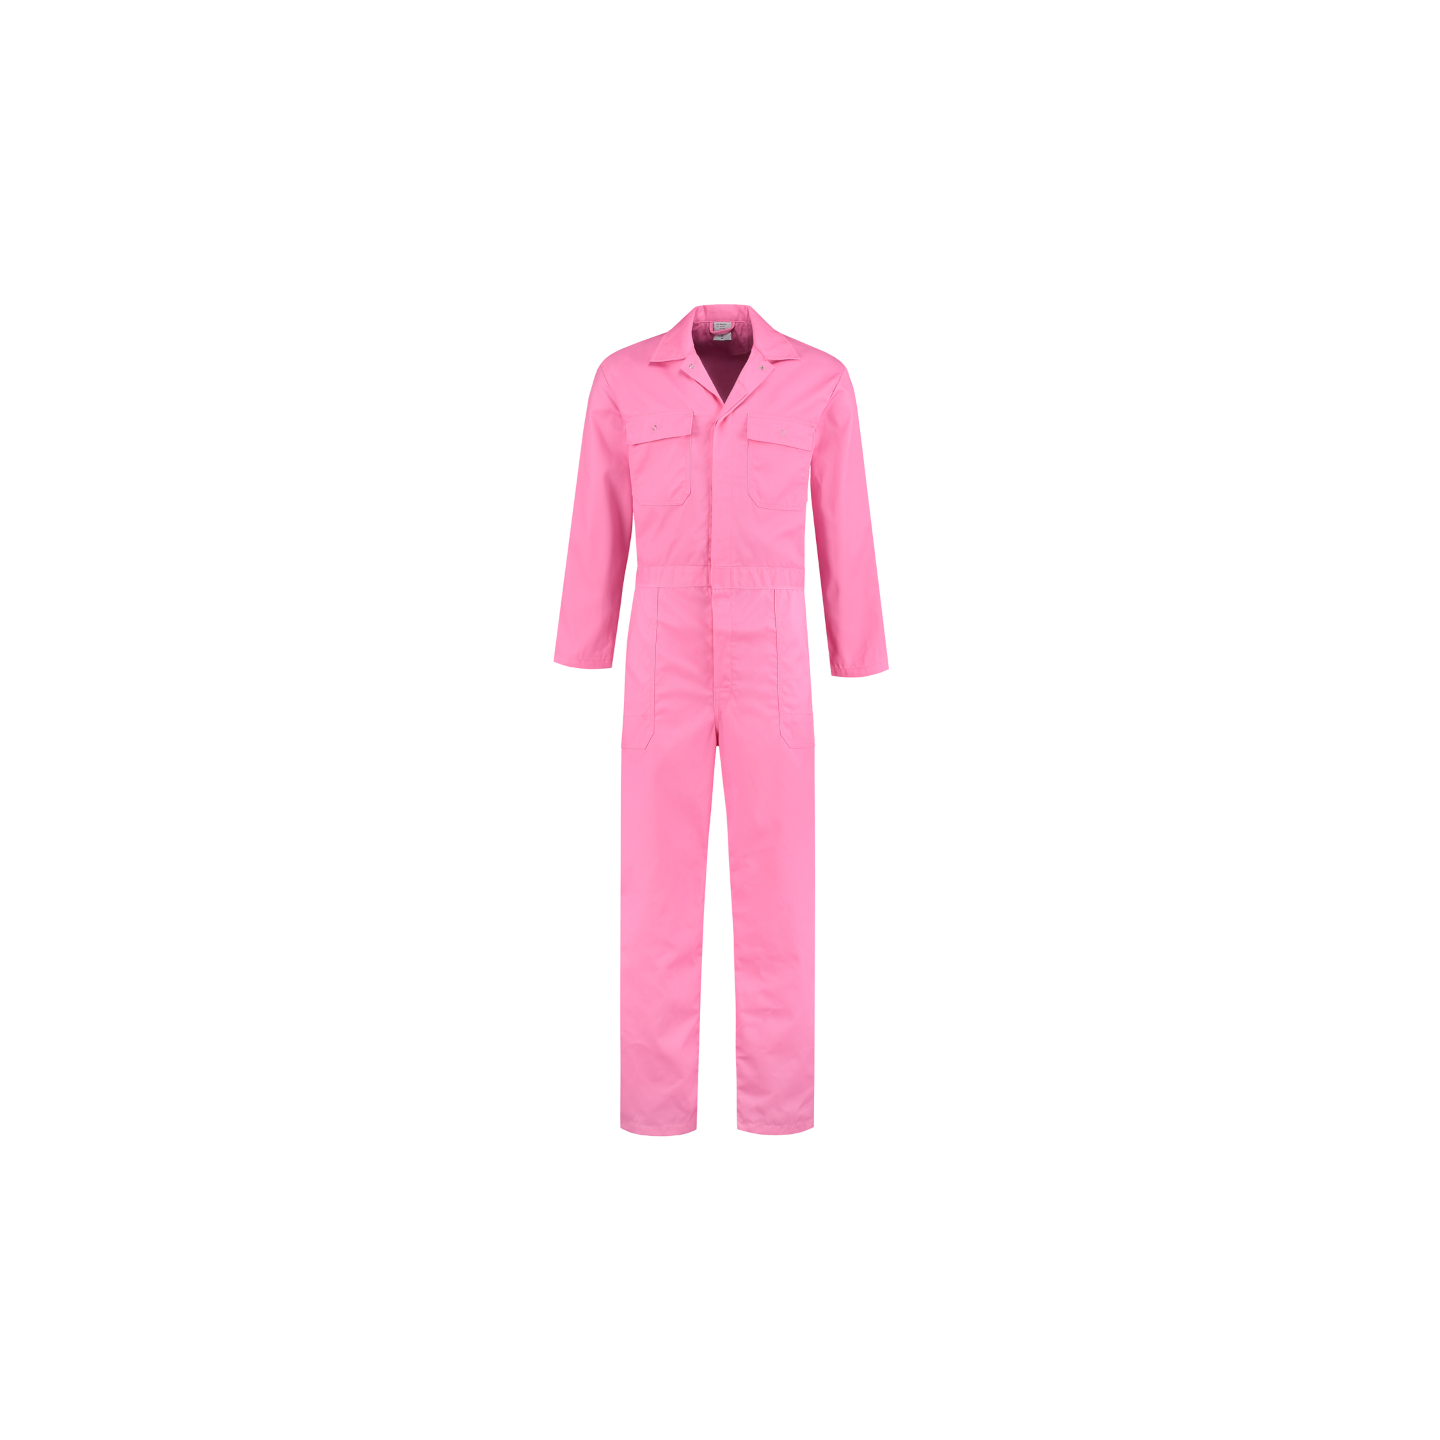 roze overall kind carnaval